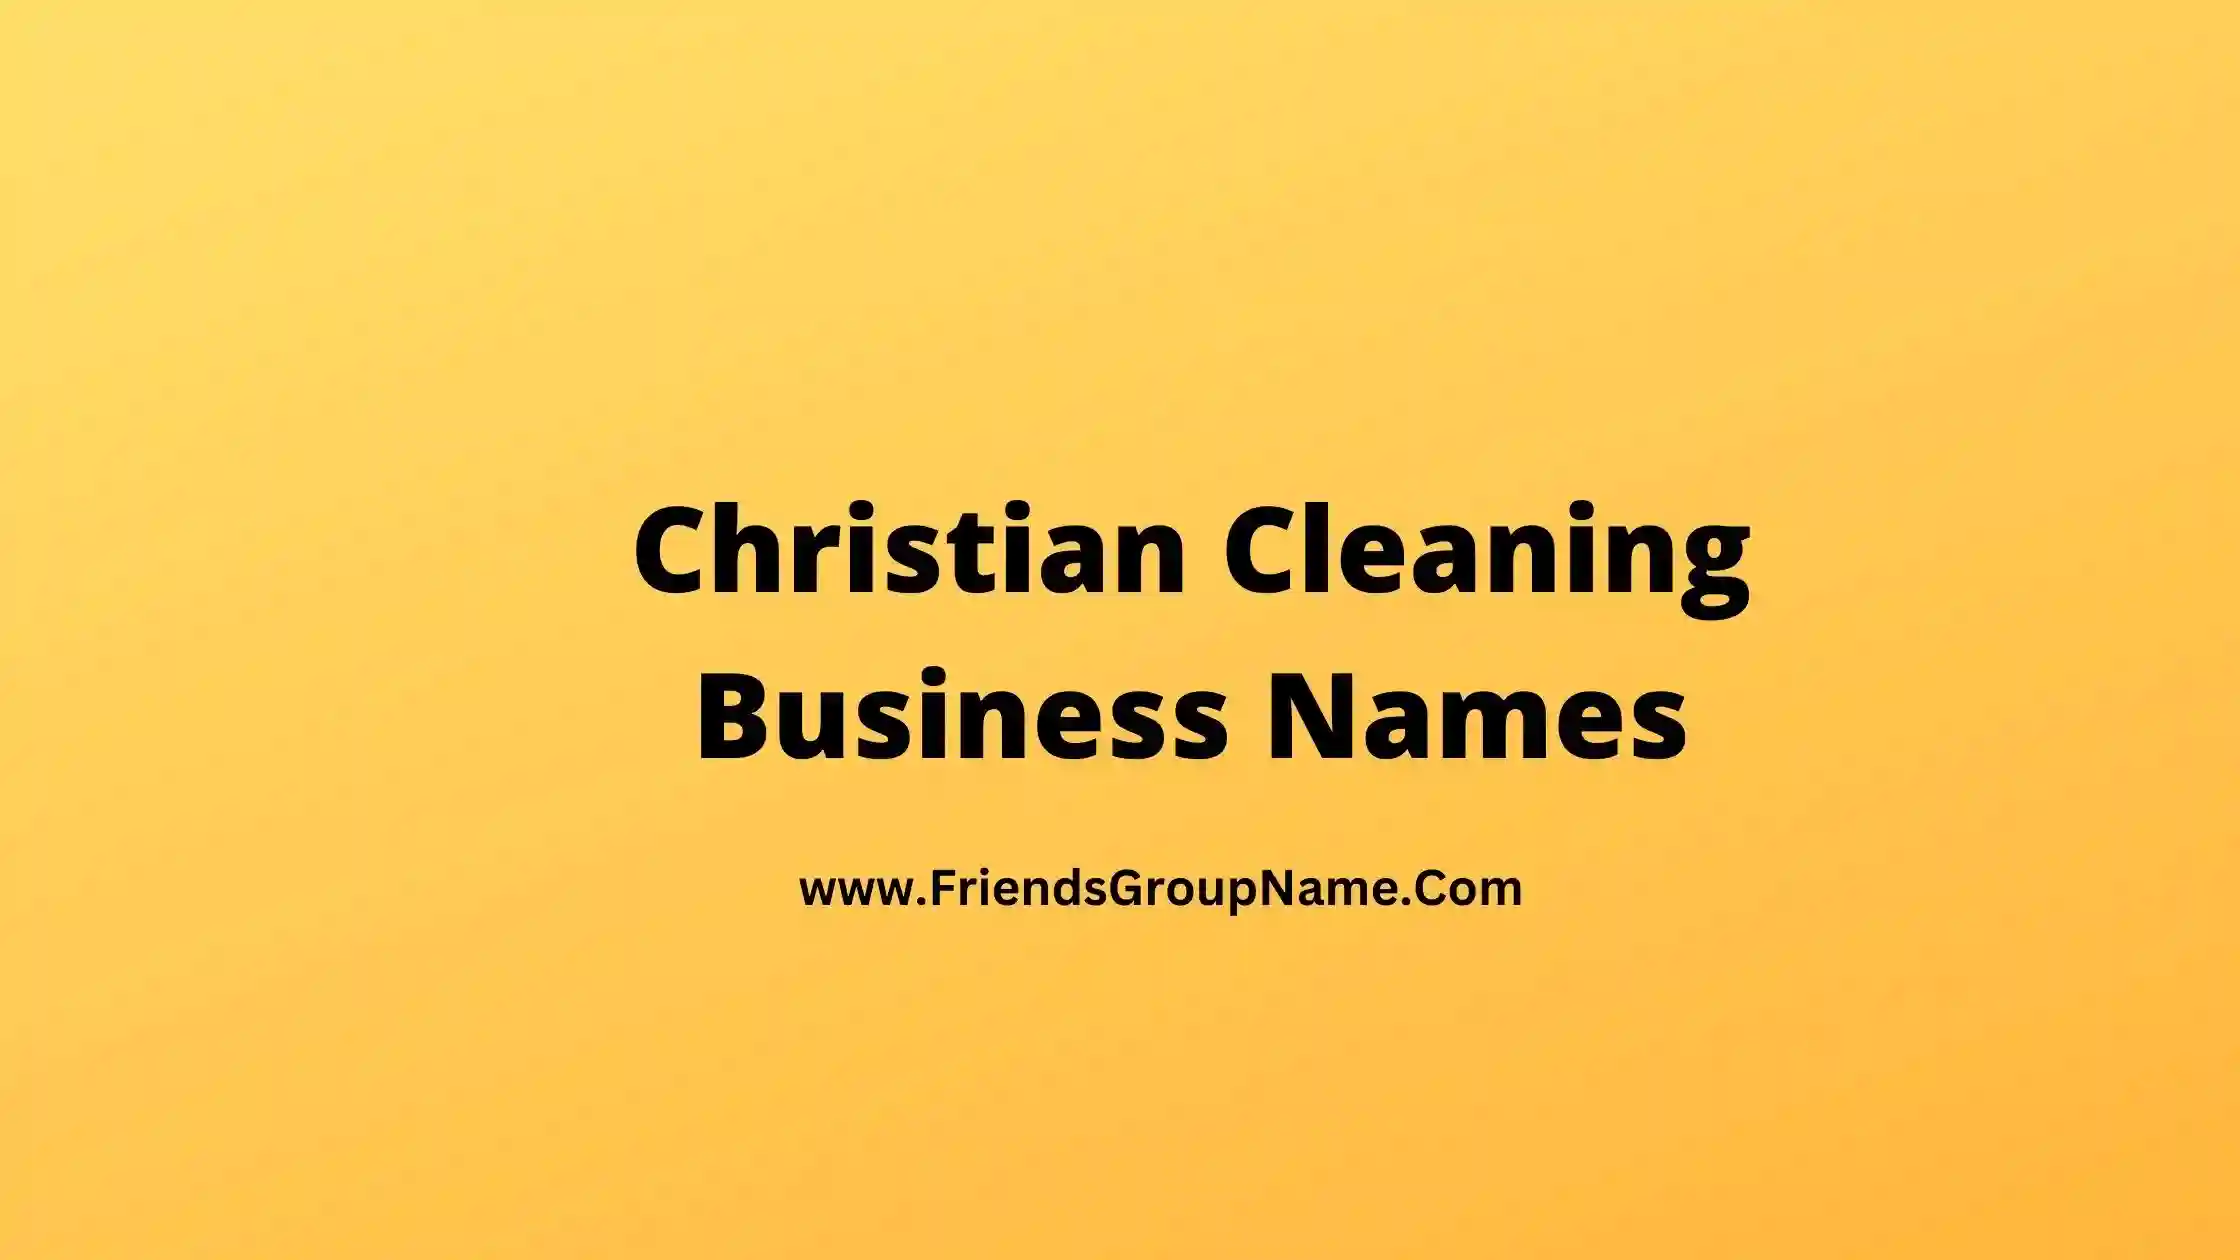 Christian Cleaning Business Names